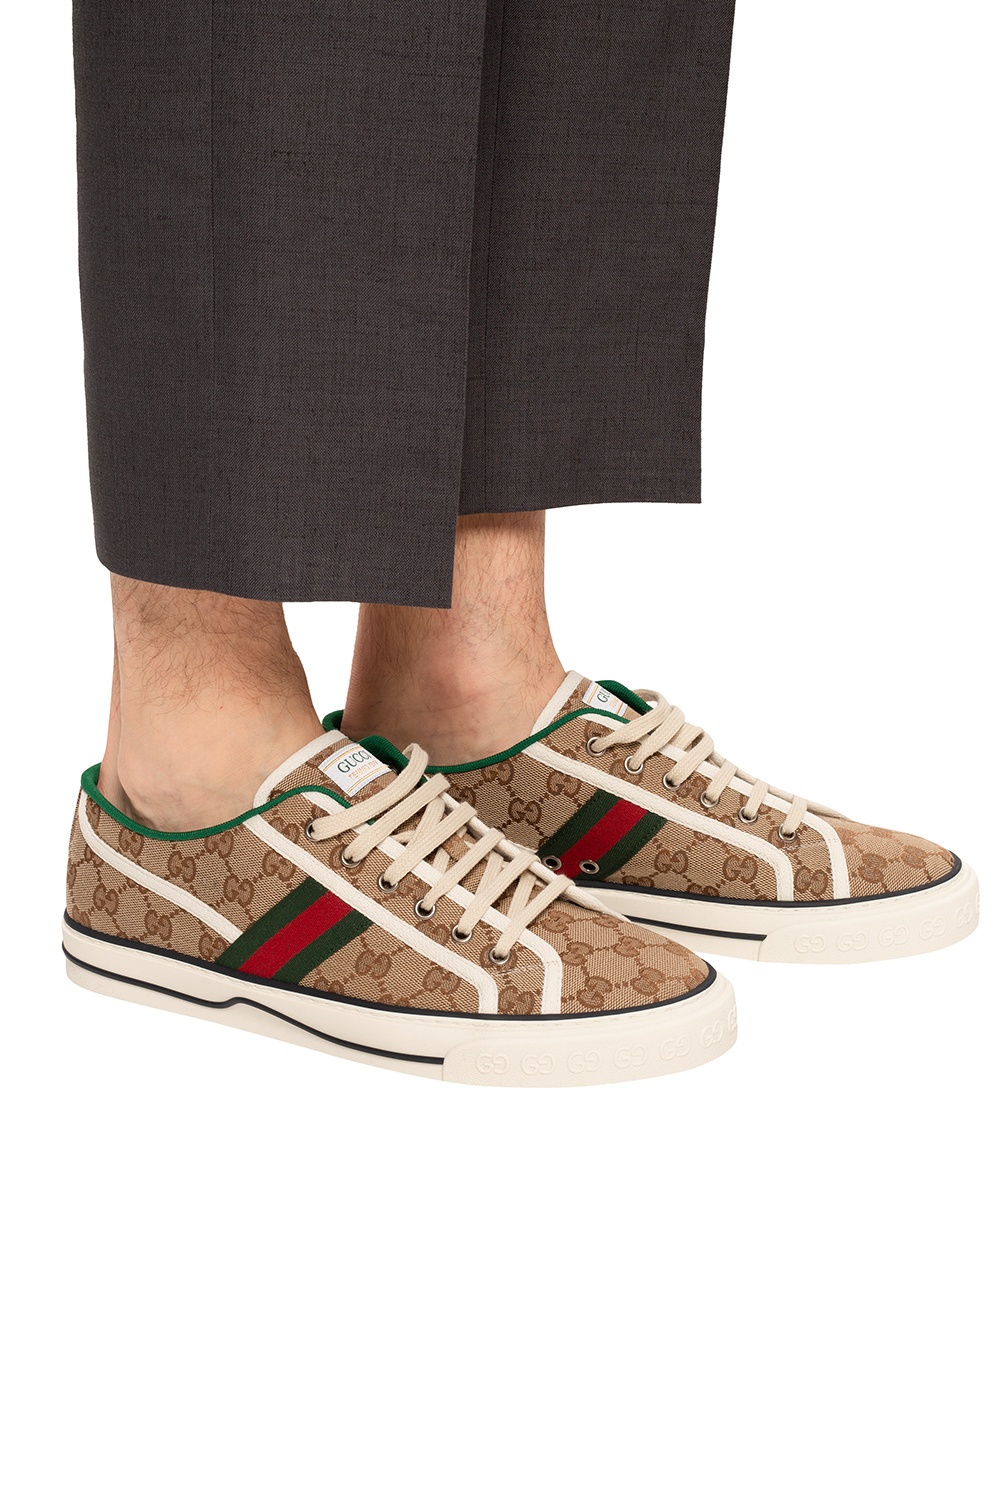 gucci sterling 'Tennis' sneakers